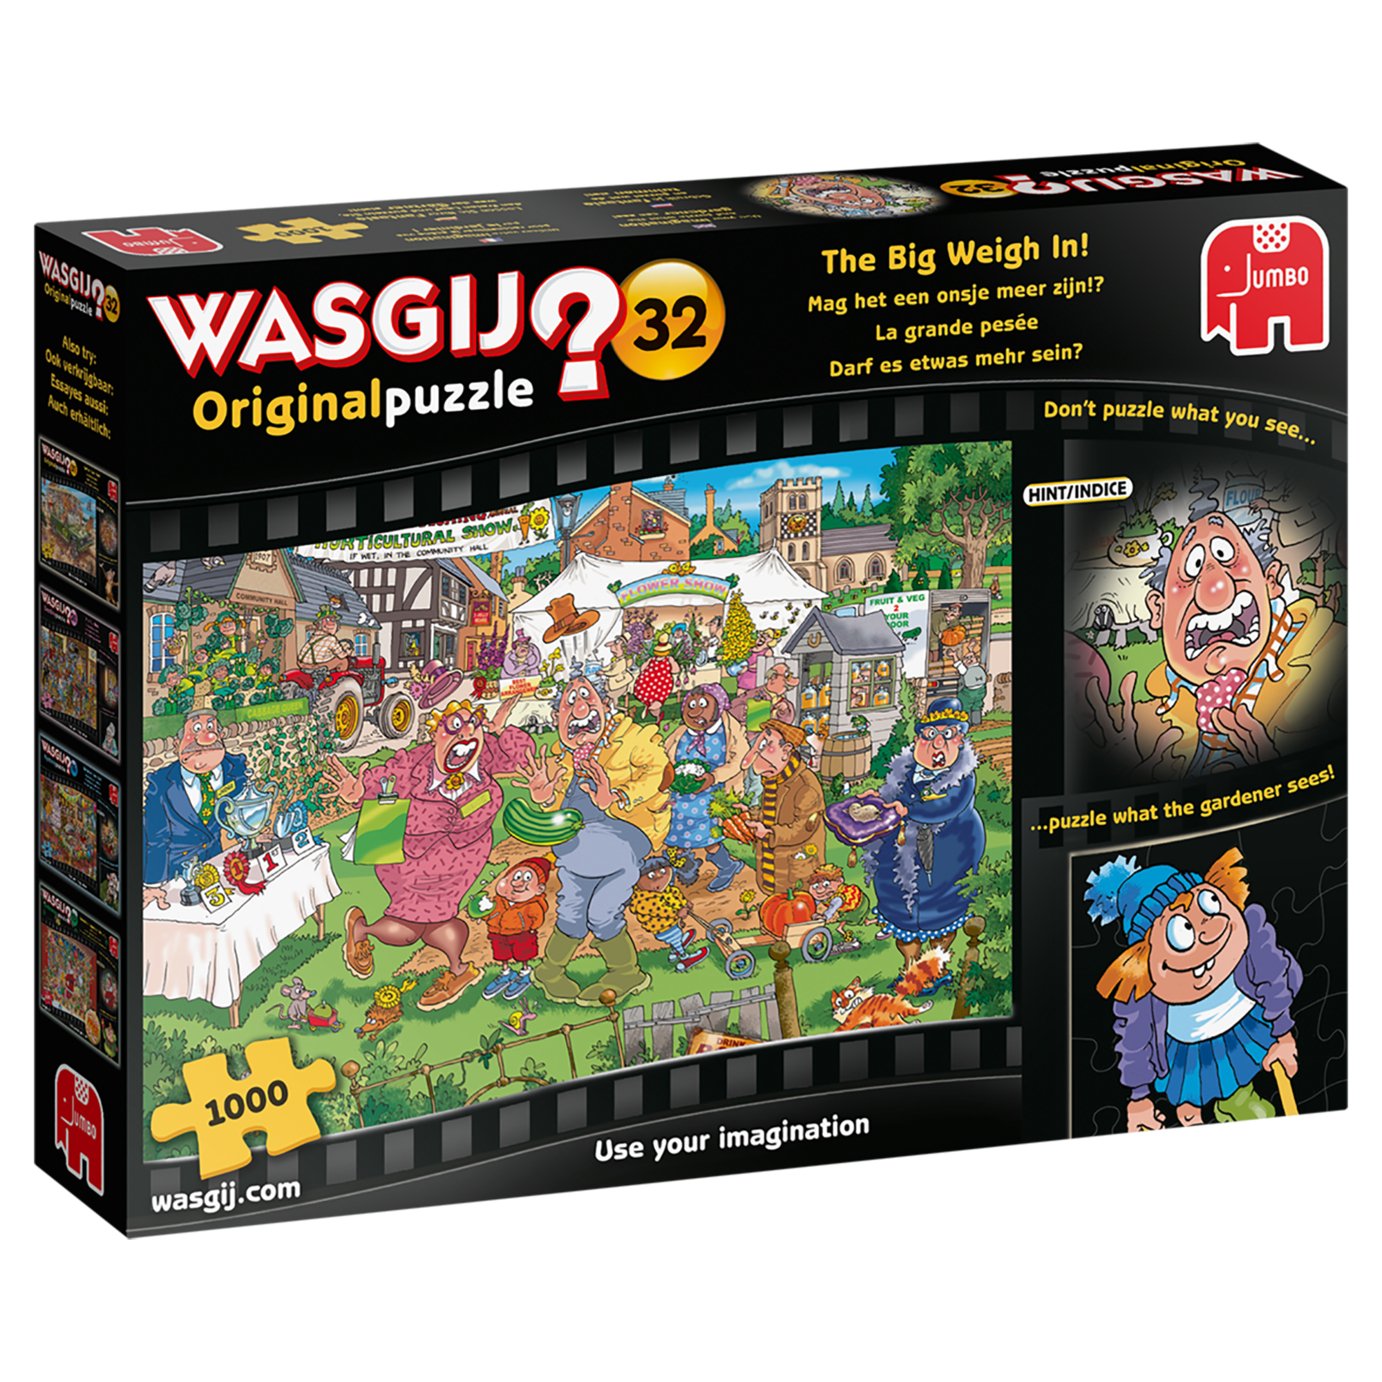 Wasgij Original 32 The Big Weigh In Puzzle Review